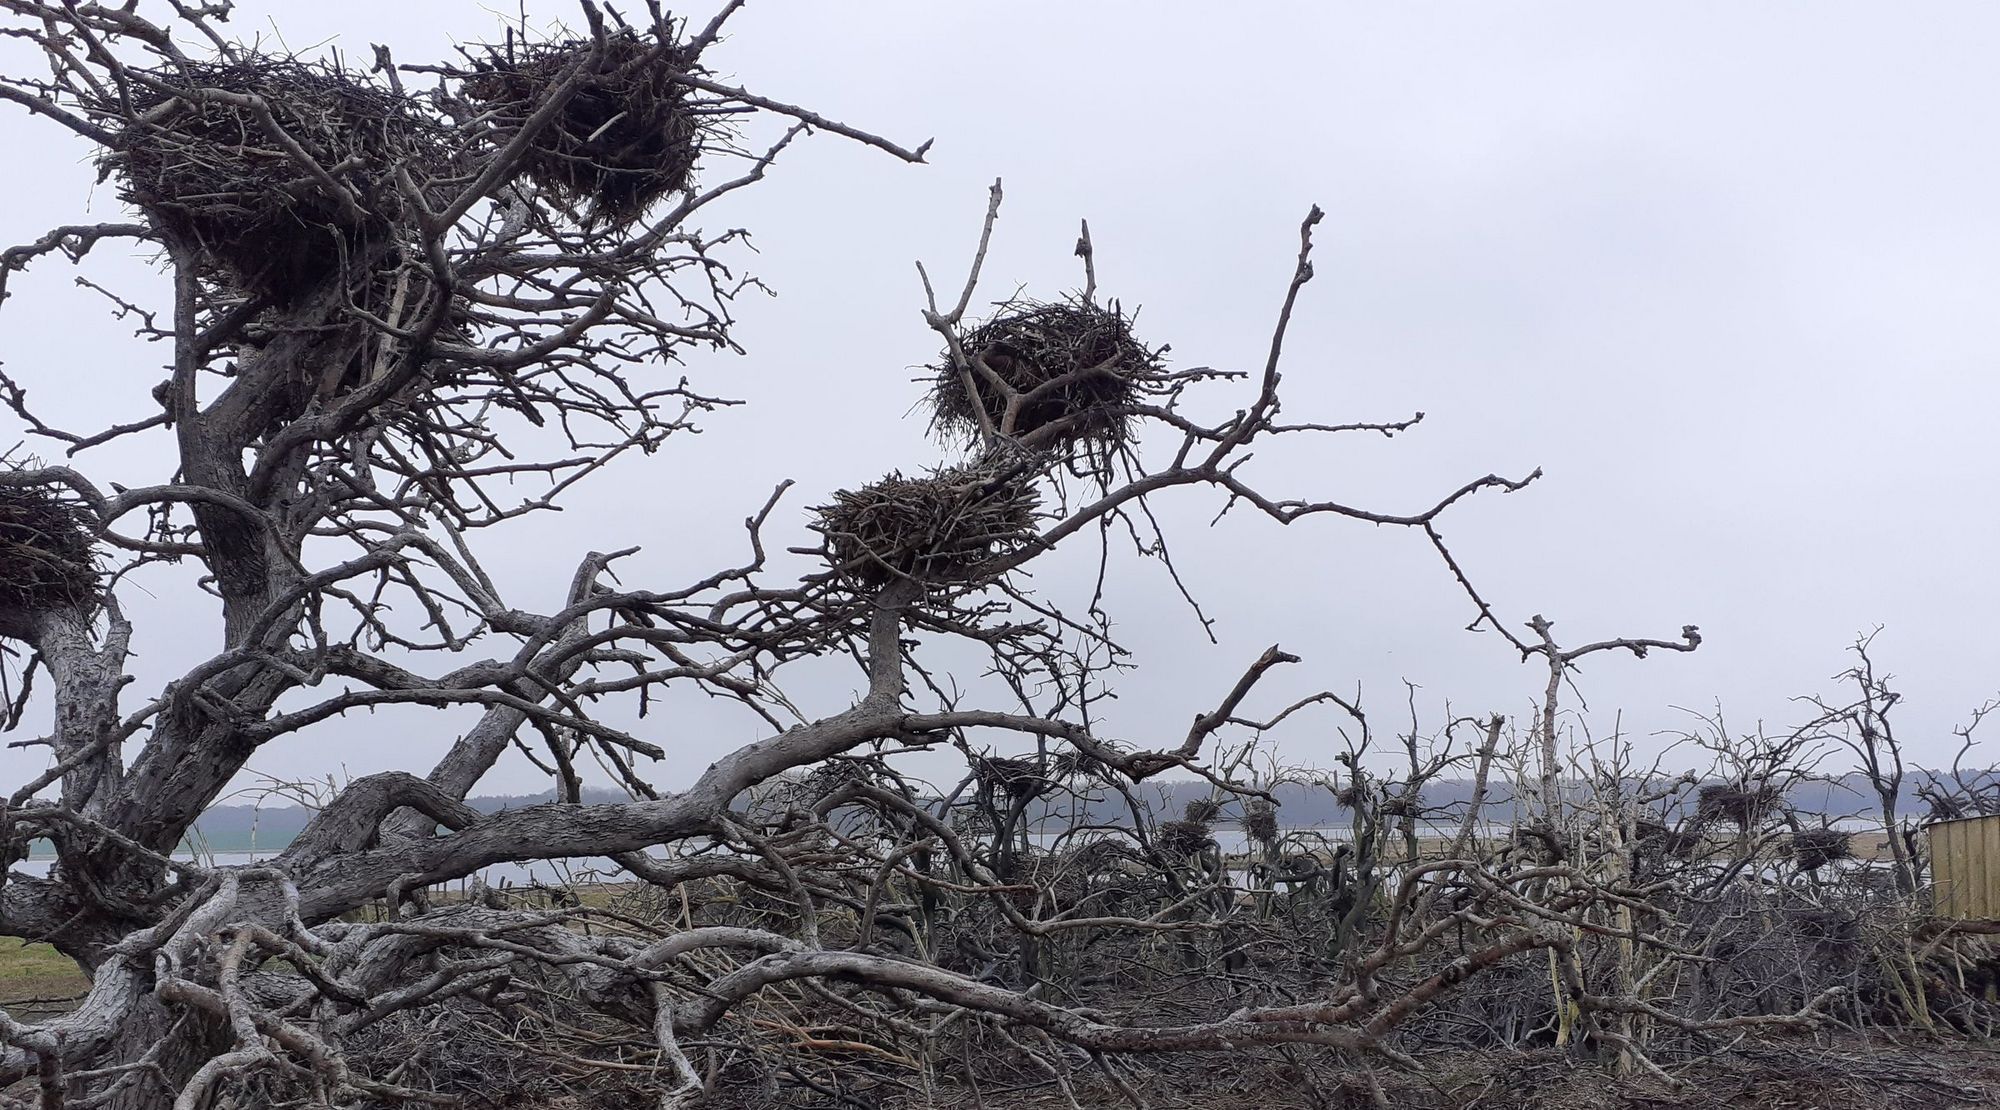 Trees without leaves with cormorant nests